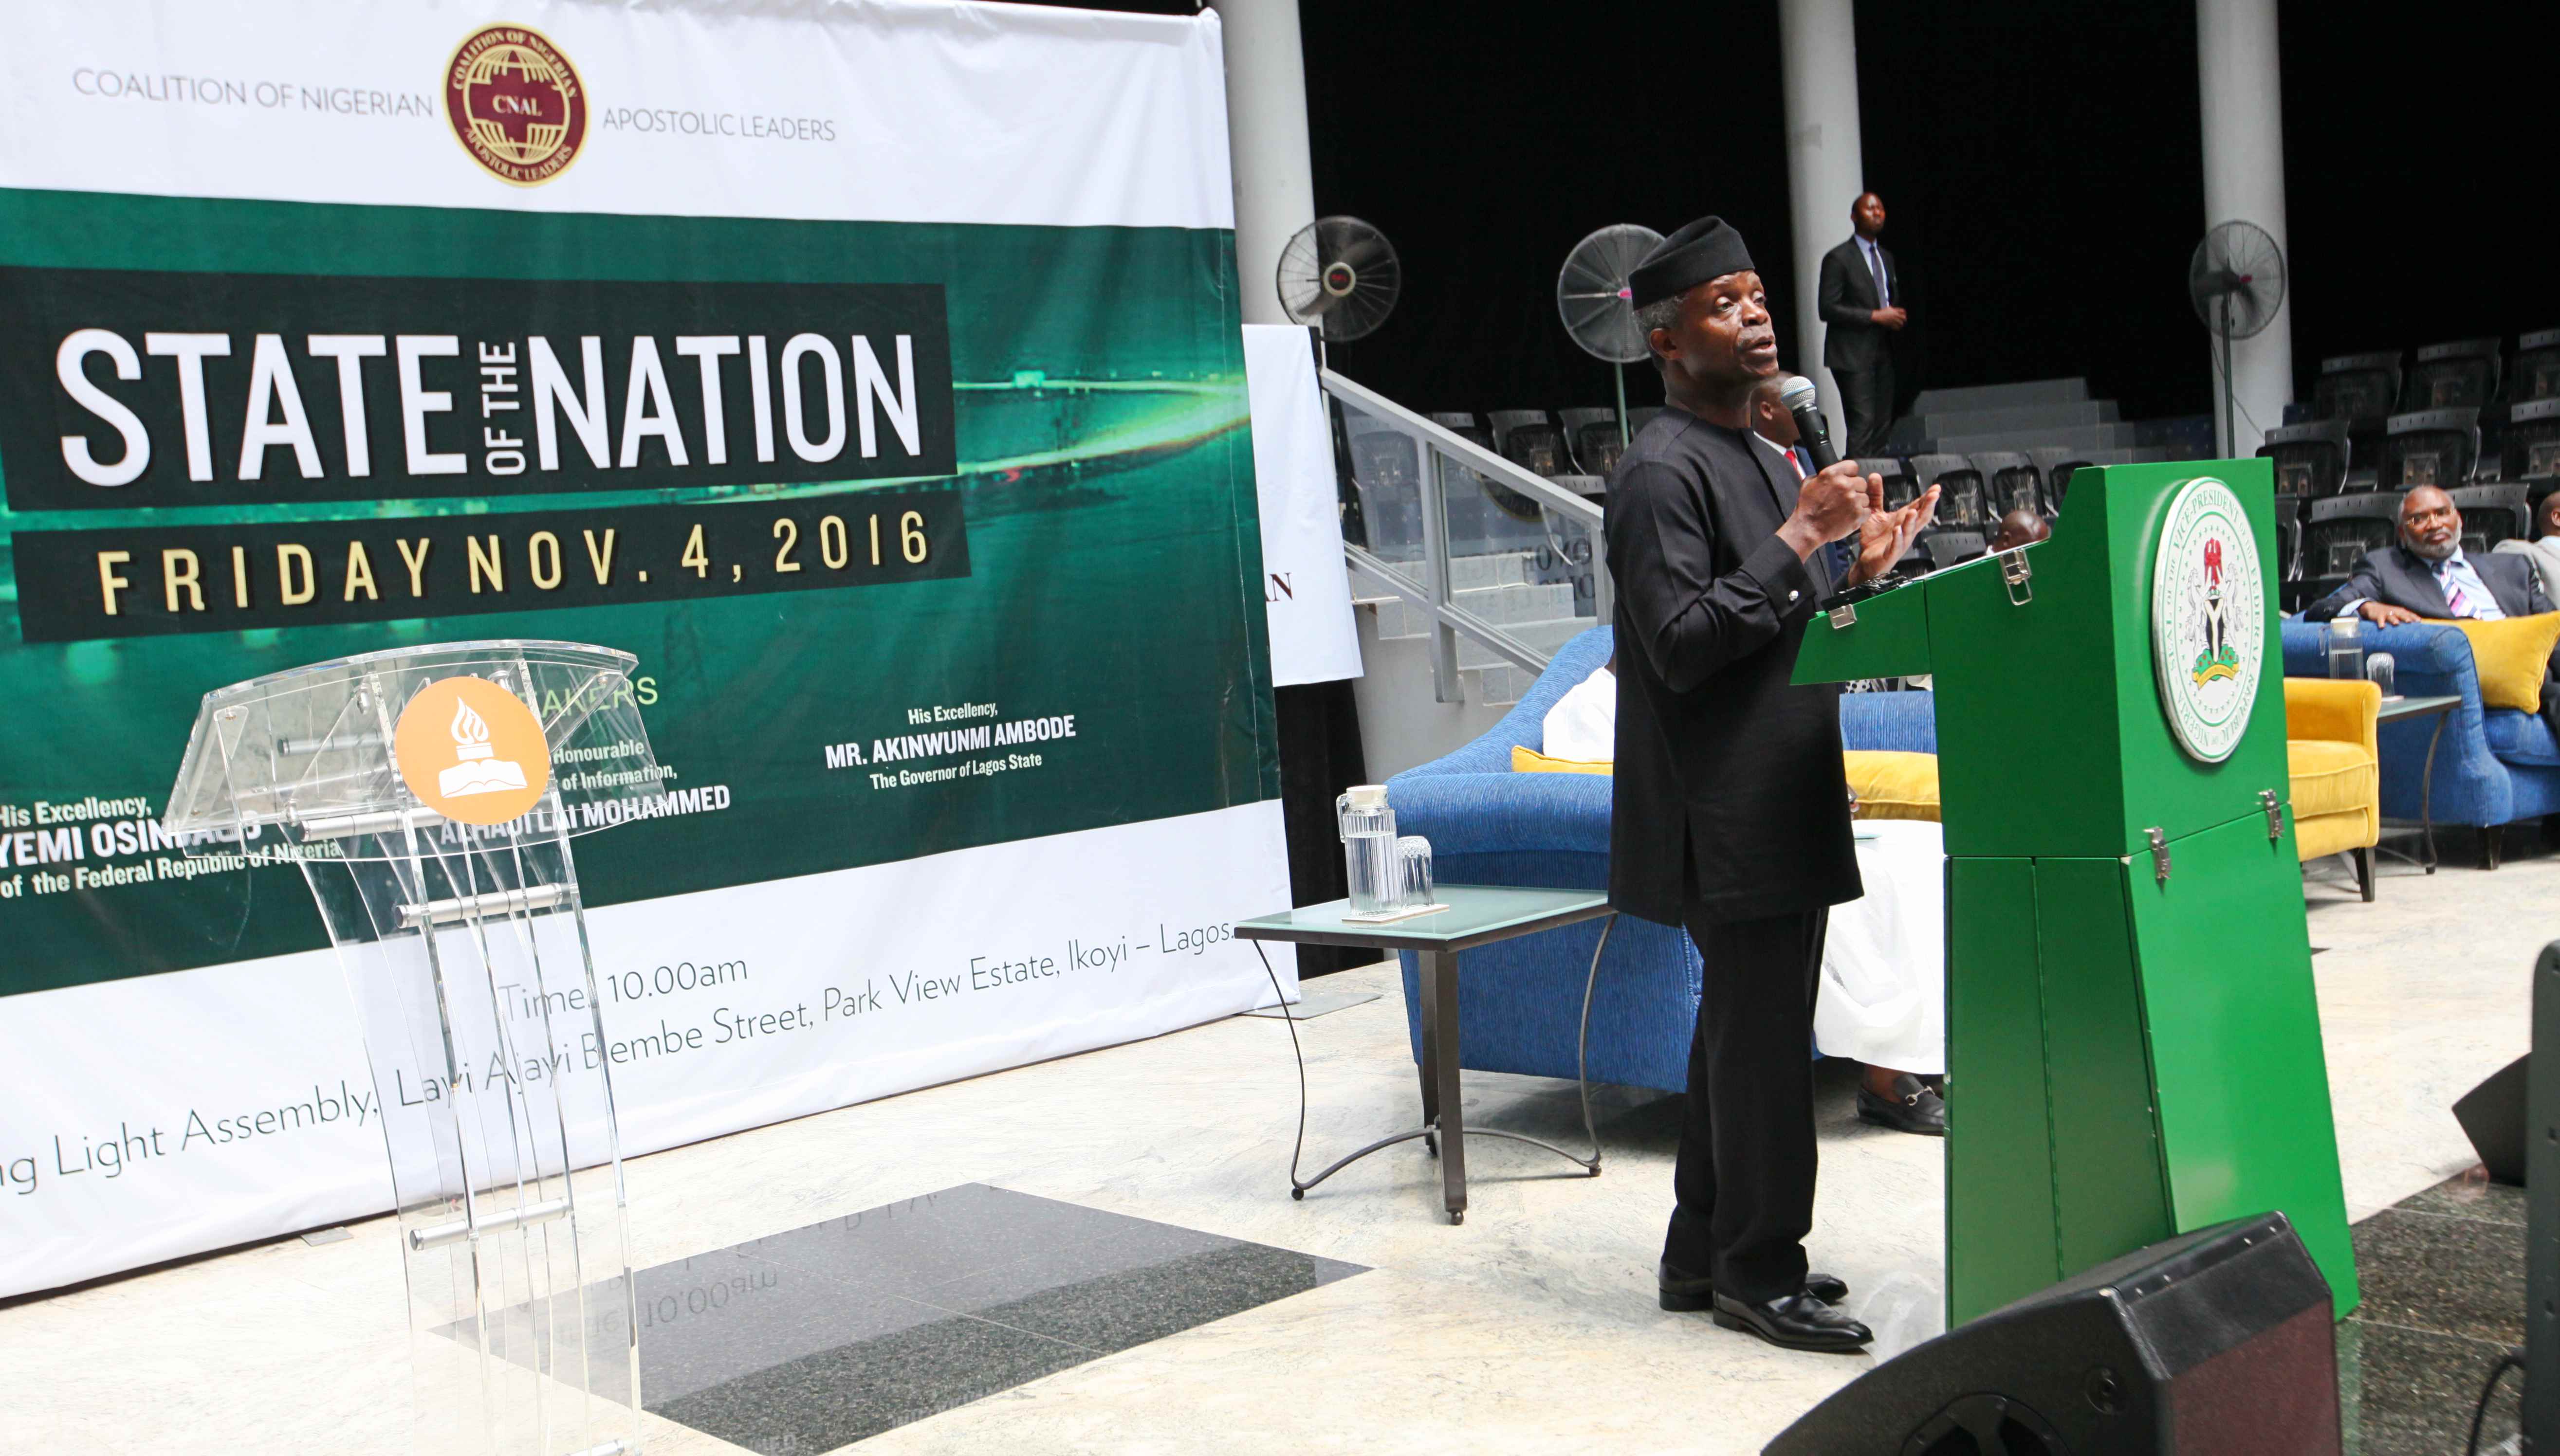 VP Osinbajo Attends The State Of The Nation At Guiding Light Assembly, Park View Estate, ikoyi Lagos On 04/11/2016